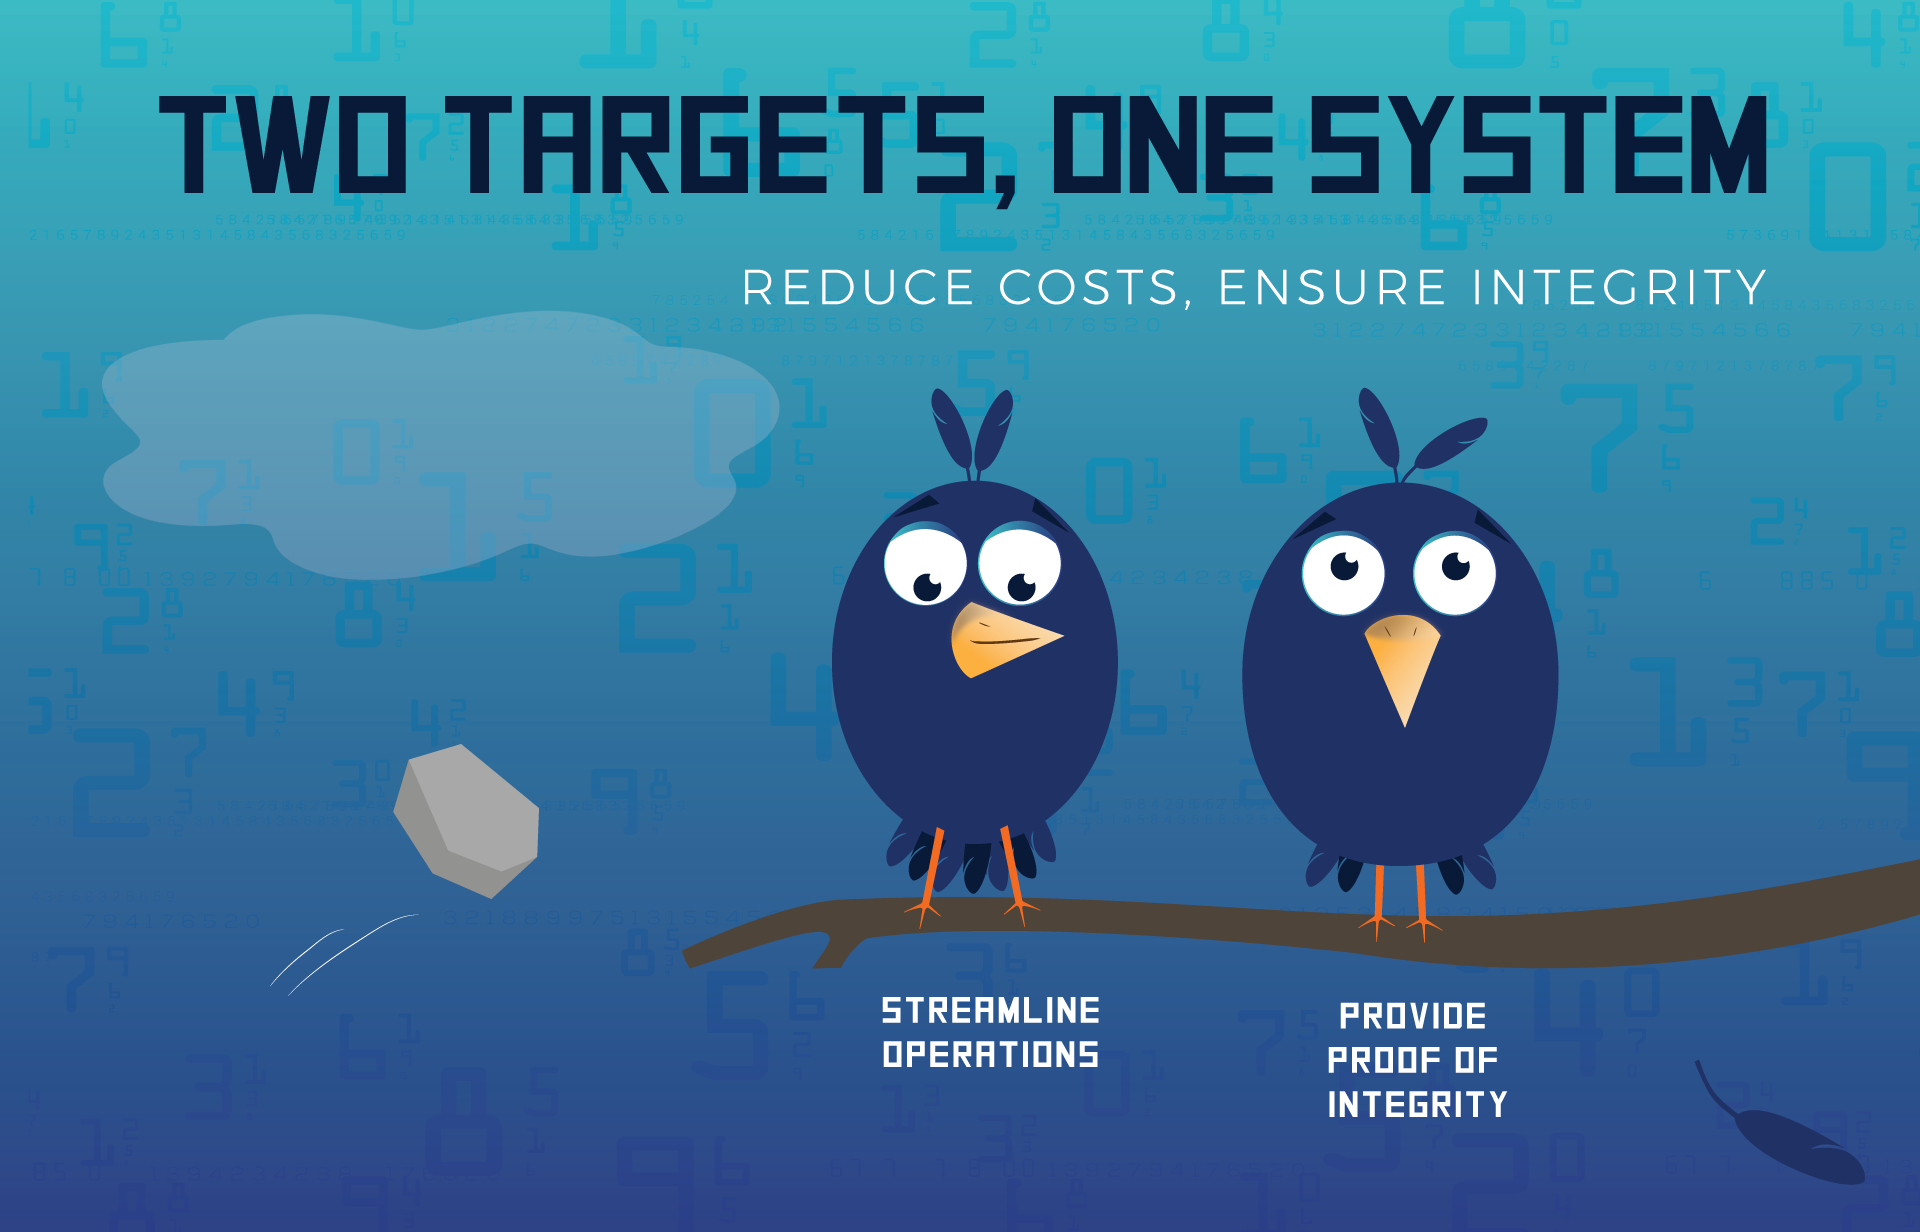 IMPROVE LOTTERY OPERATIONS, two targets, on system. Reduce costs, ensure integrity